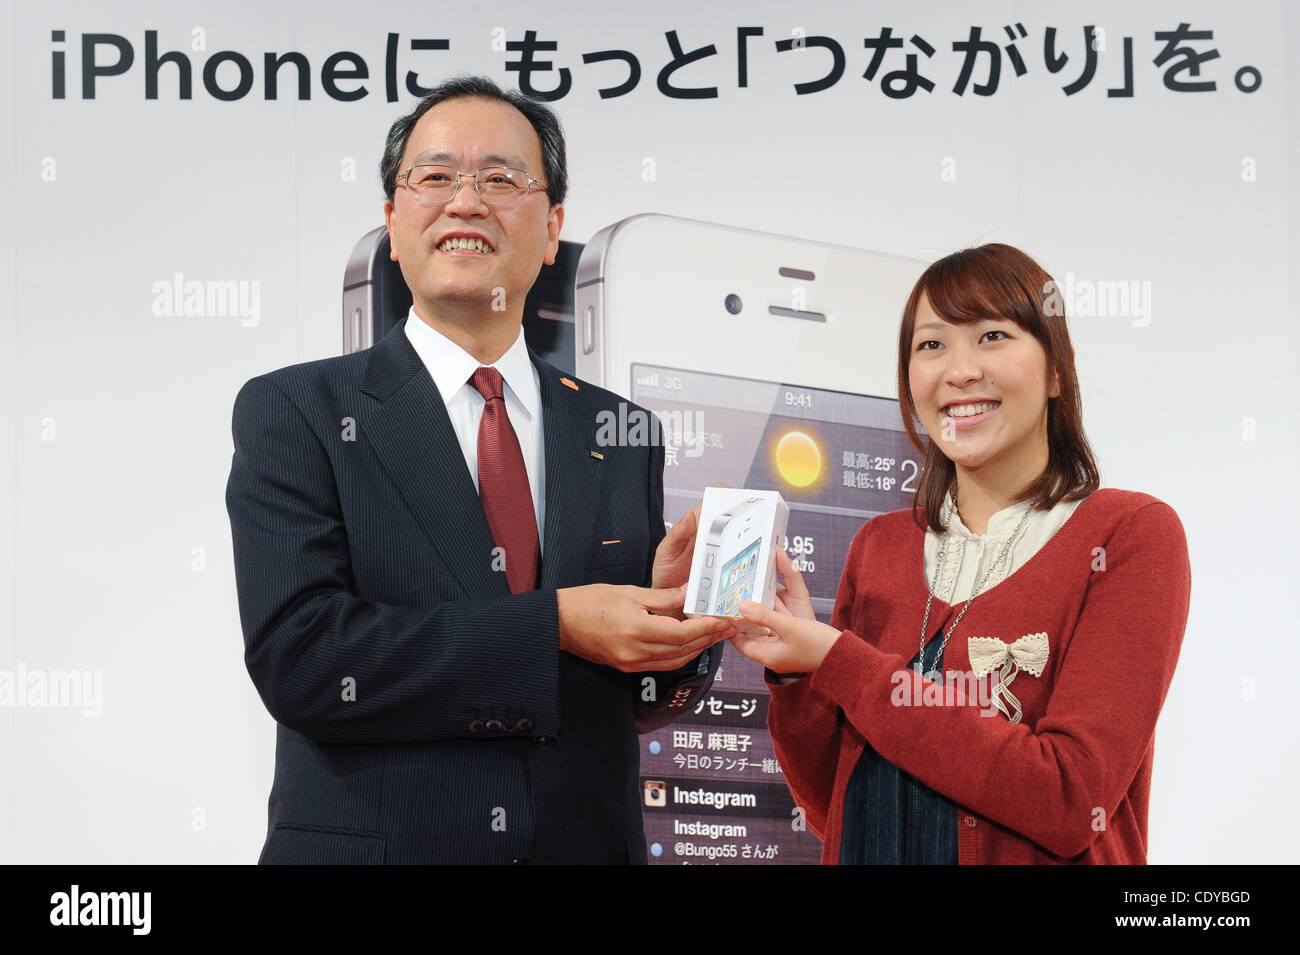 Oct. 14, 2011 - Tokyo, Japan - KDDI Corporation President TAKASHI TANAKA attends the launch event of the Apple Inc. iPhone 4S at the the KDDI's shop in Tokyo, Japan. iPhone 4S will be released simultaneously in 7 countries. iPhone 4S will be sold by Softbank and AU, 2 carriers for the first time in  Stock Photo